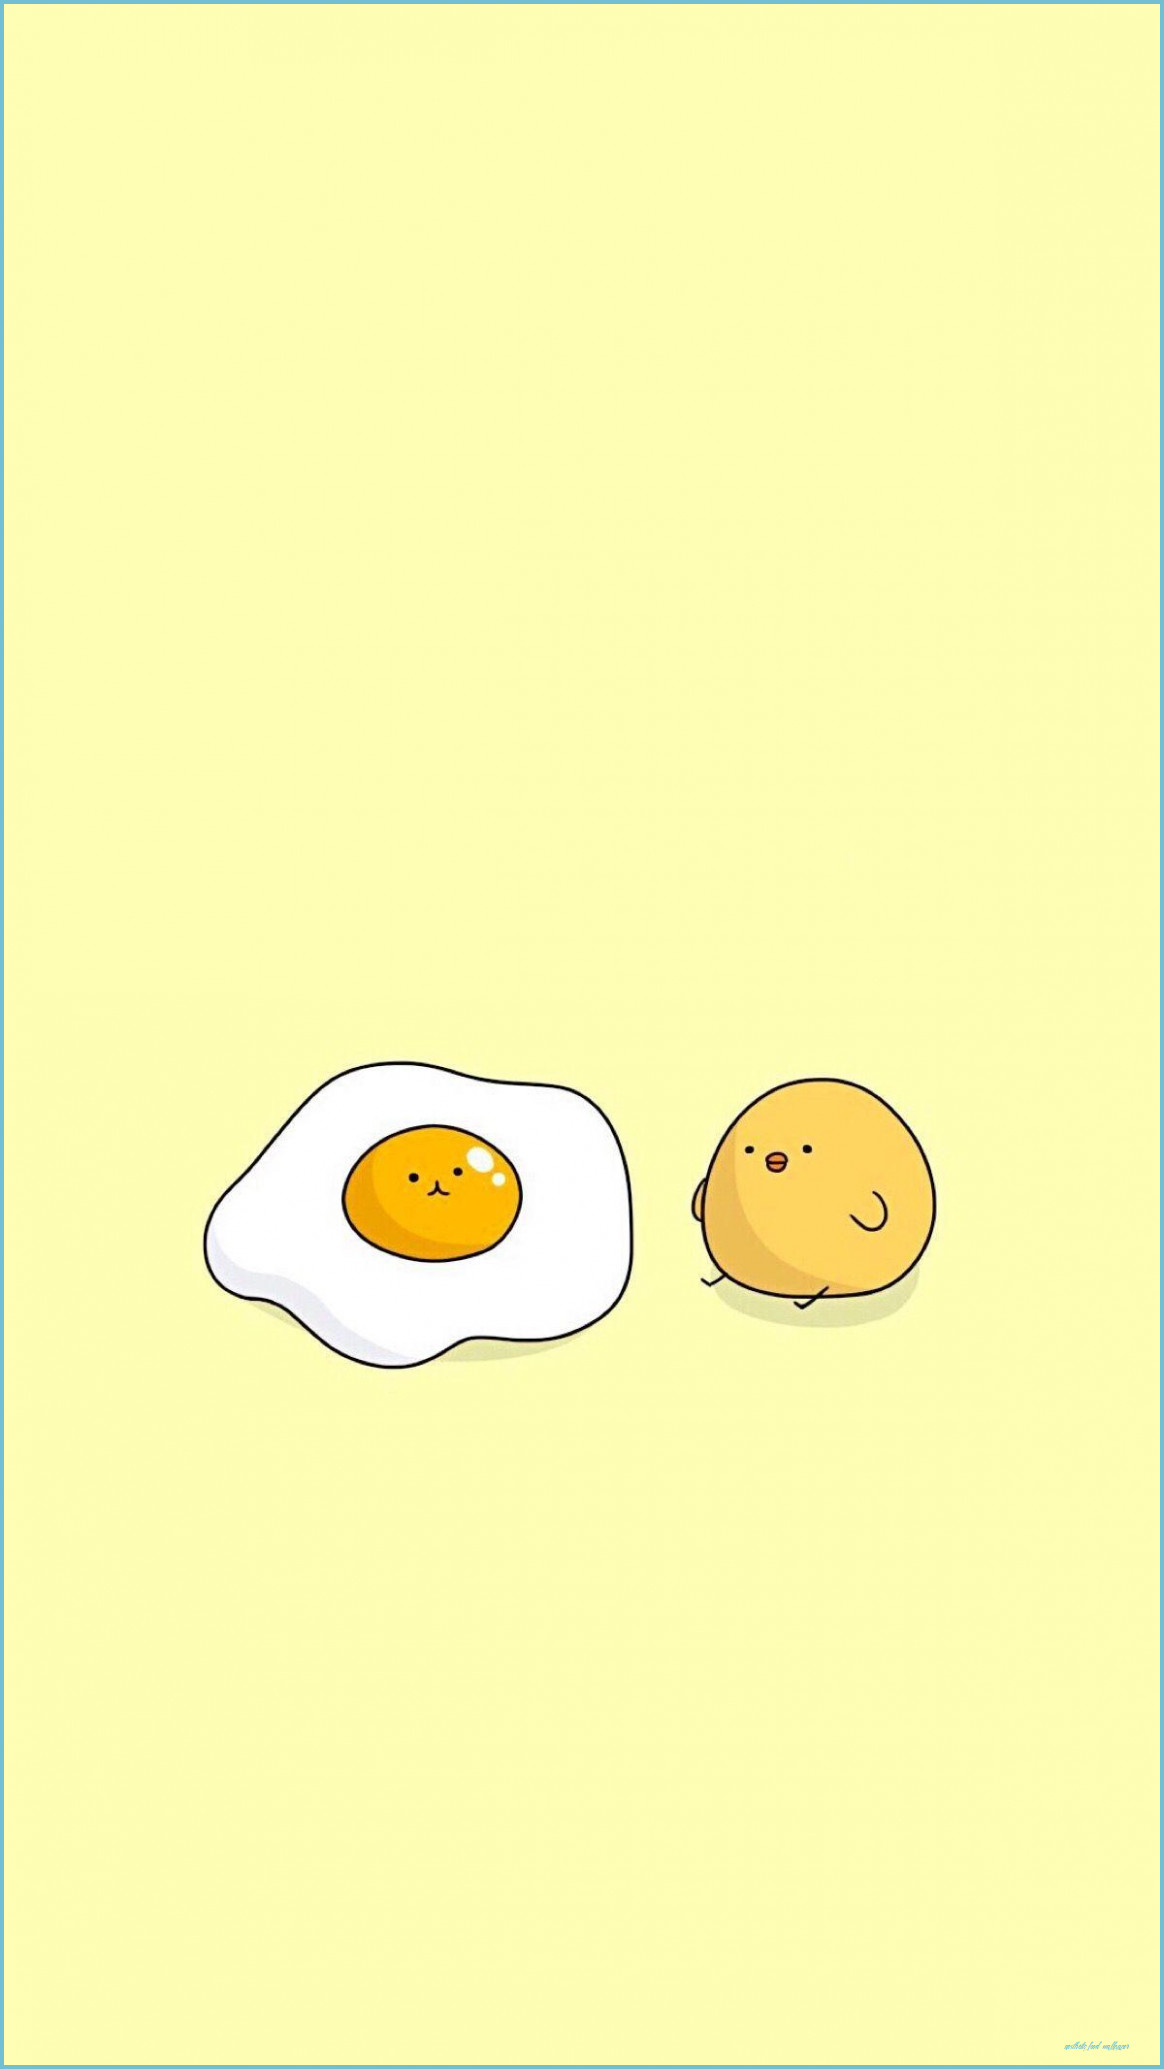 Cute yellow wallpaper with a fried egg and a potato - Food